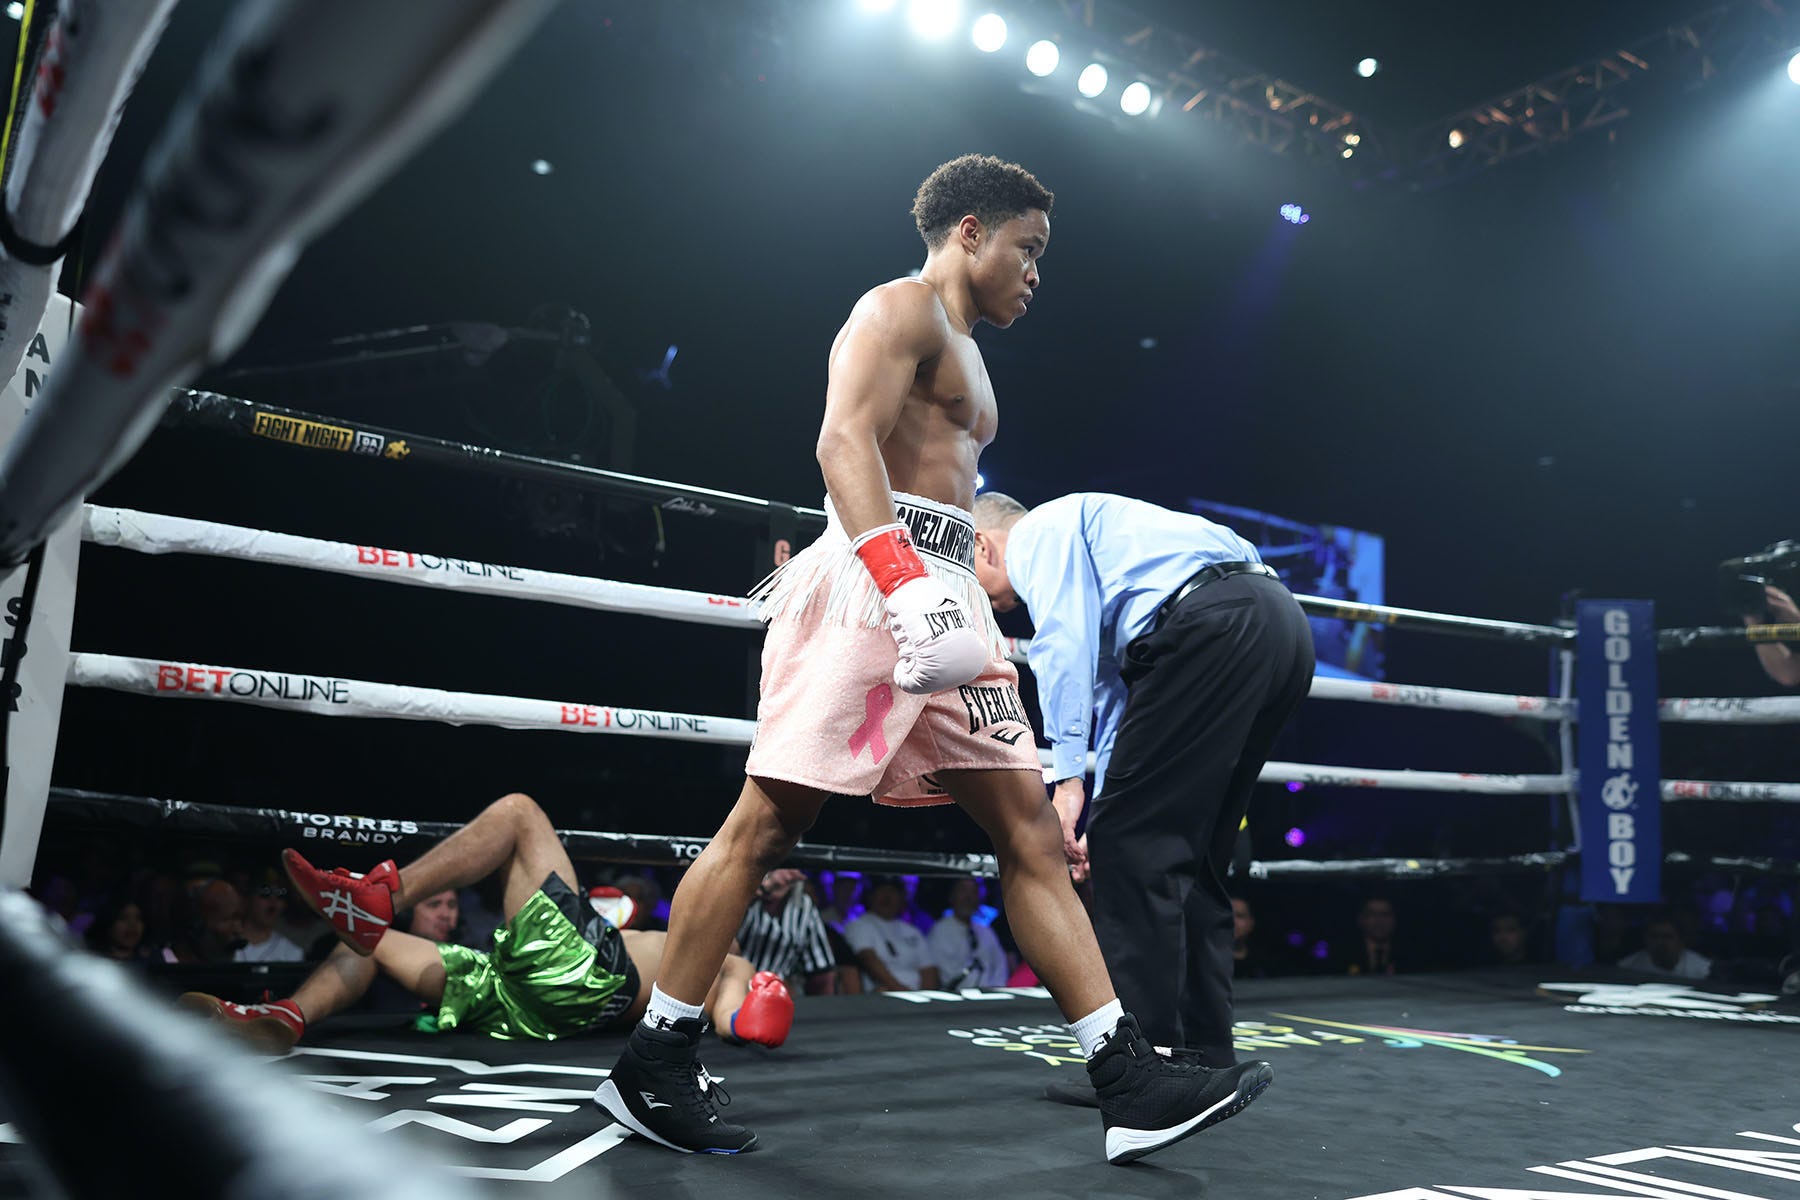 A 20-year-old American scored a first-round KO and continues his trajectory  as one of boxing's emerging stars | Business Insider Africa